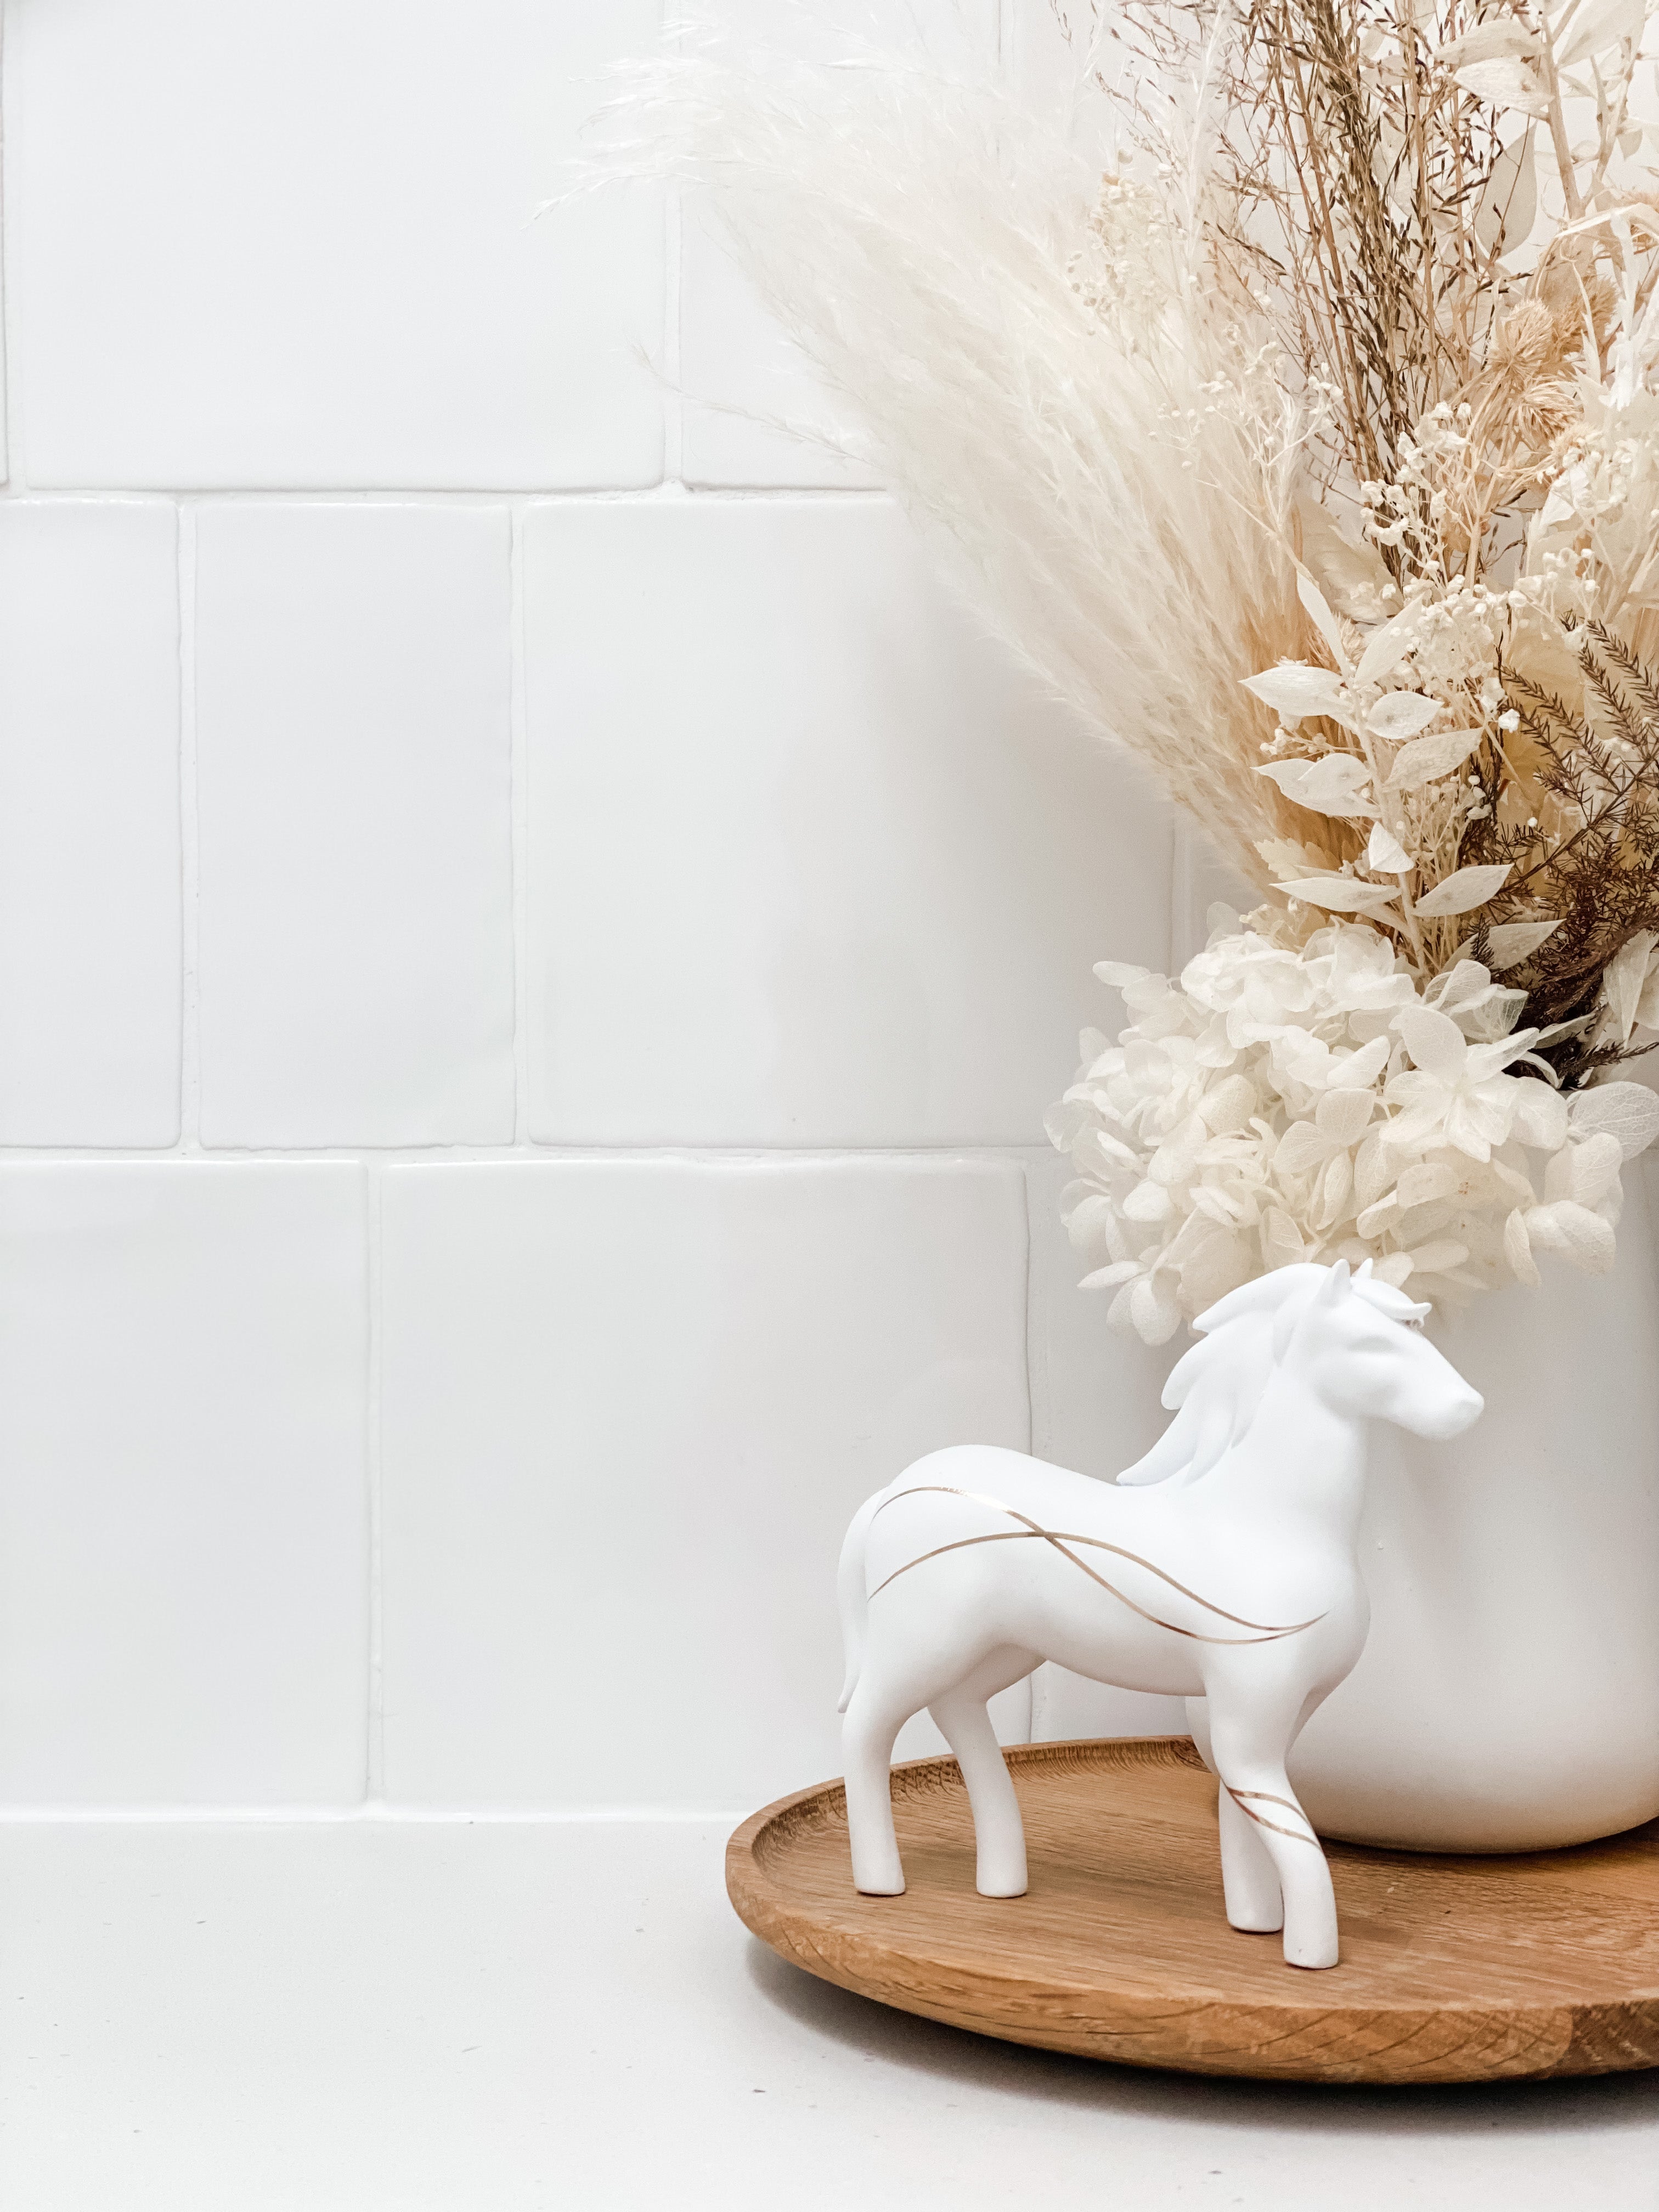 a white horse figurine sitting on a wooden tray